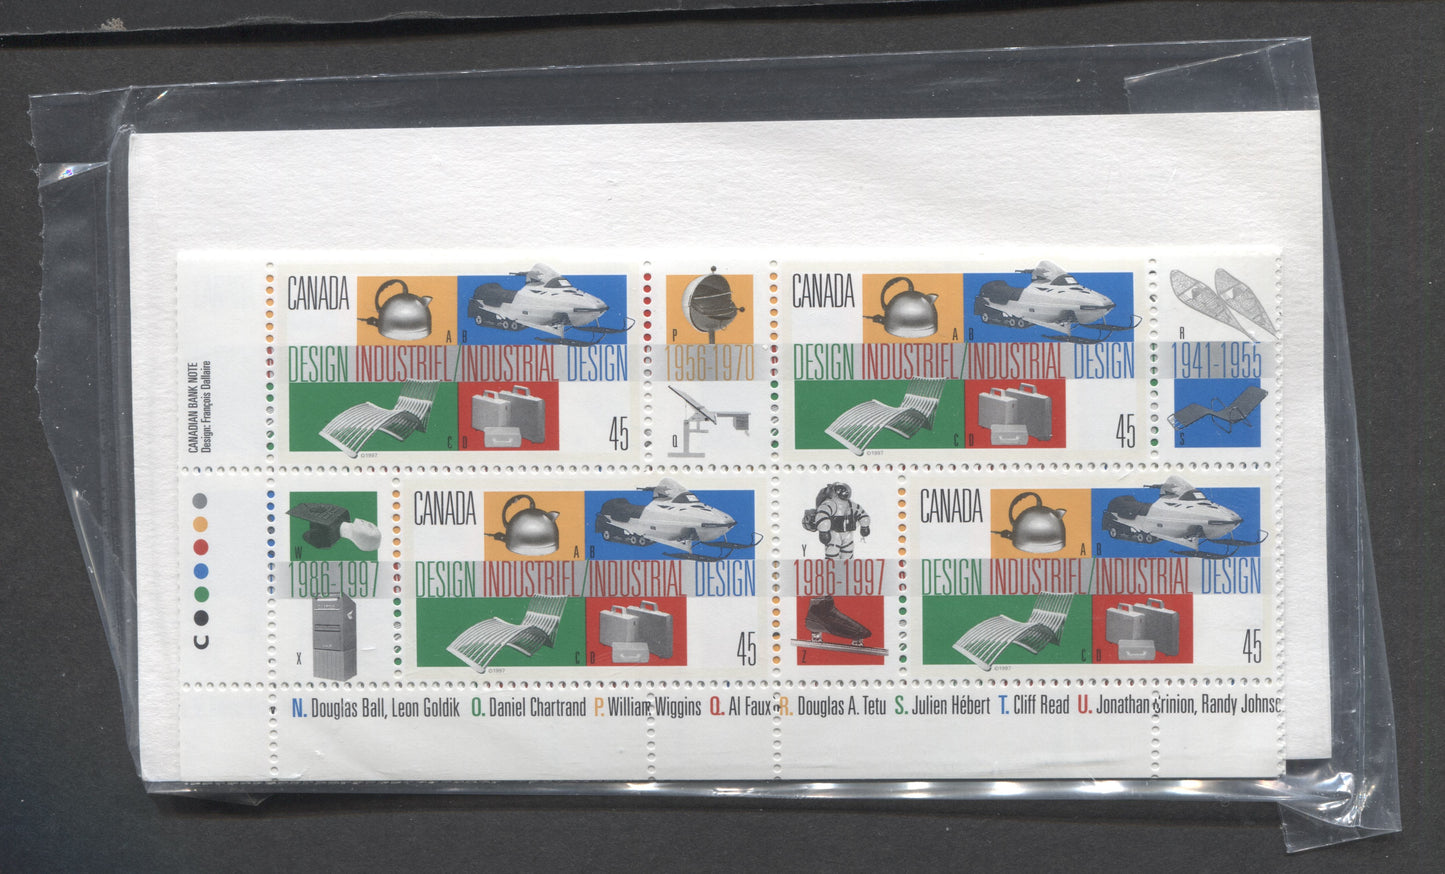 Lot 310 Canada #1654 45c Multicolored 1997 Industrial Design Issue, Sealed Pack Of Corner Inscription Blocks on GT4 Coated Paper With HB Type 6A Insert Card, VFNH, Unitrade Cat. $18